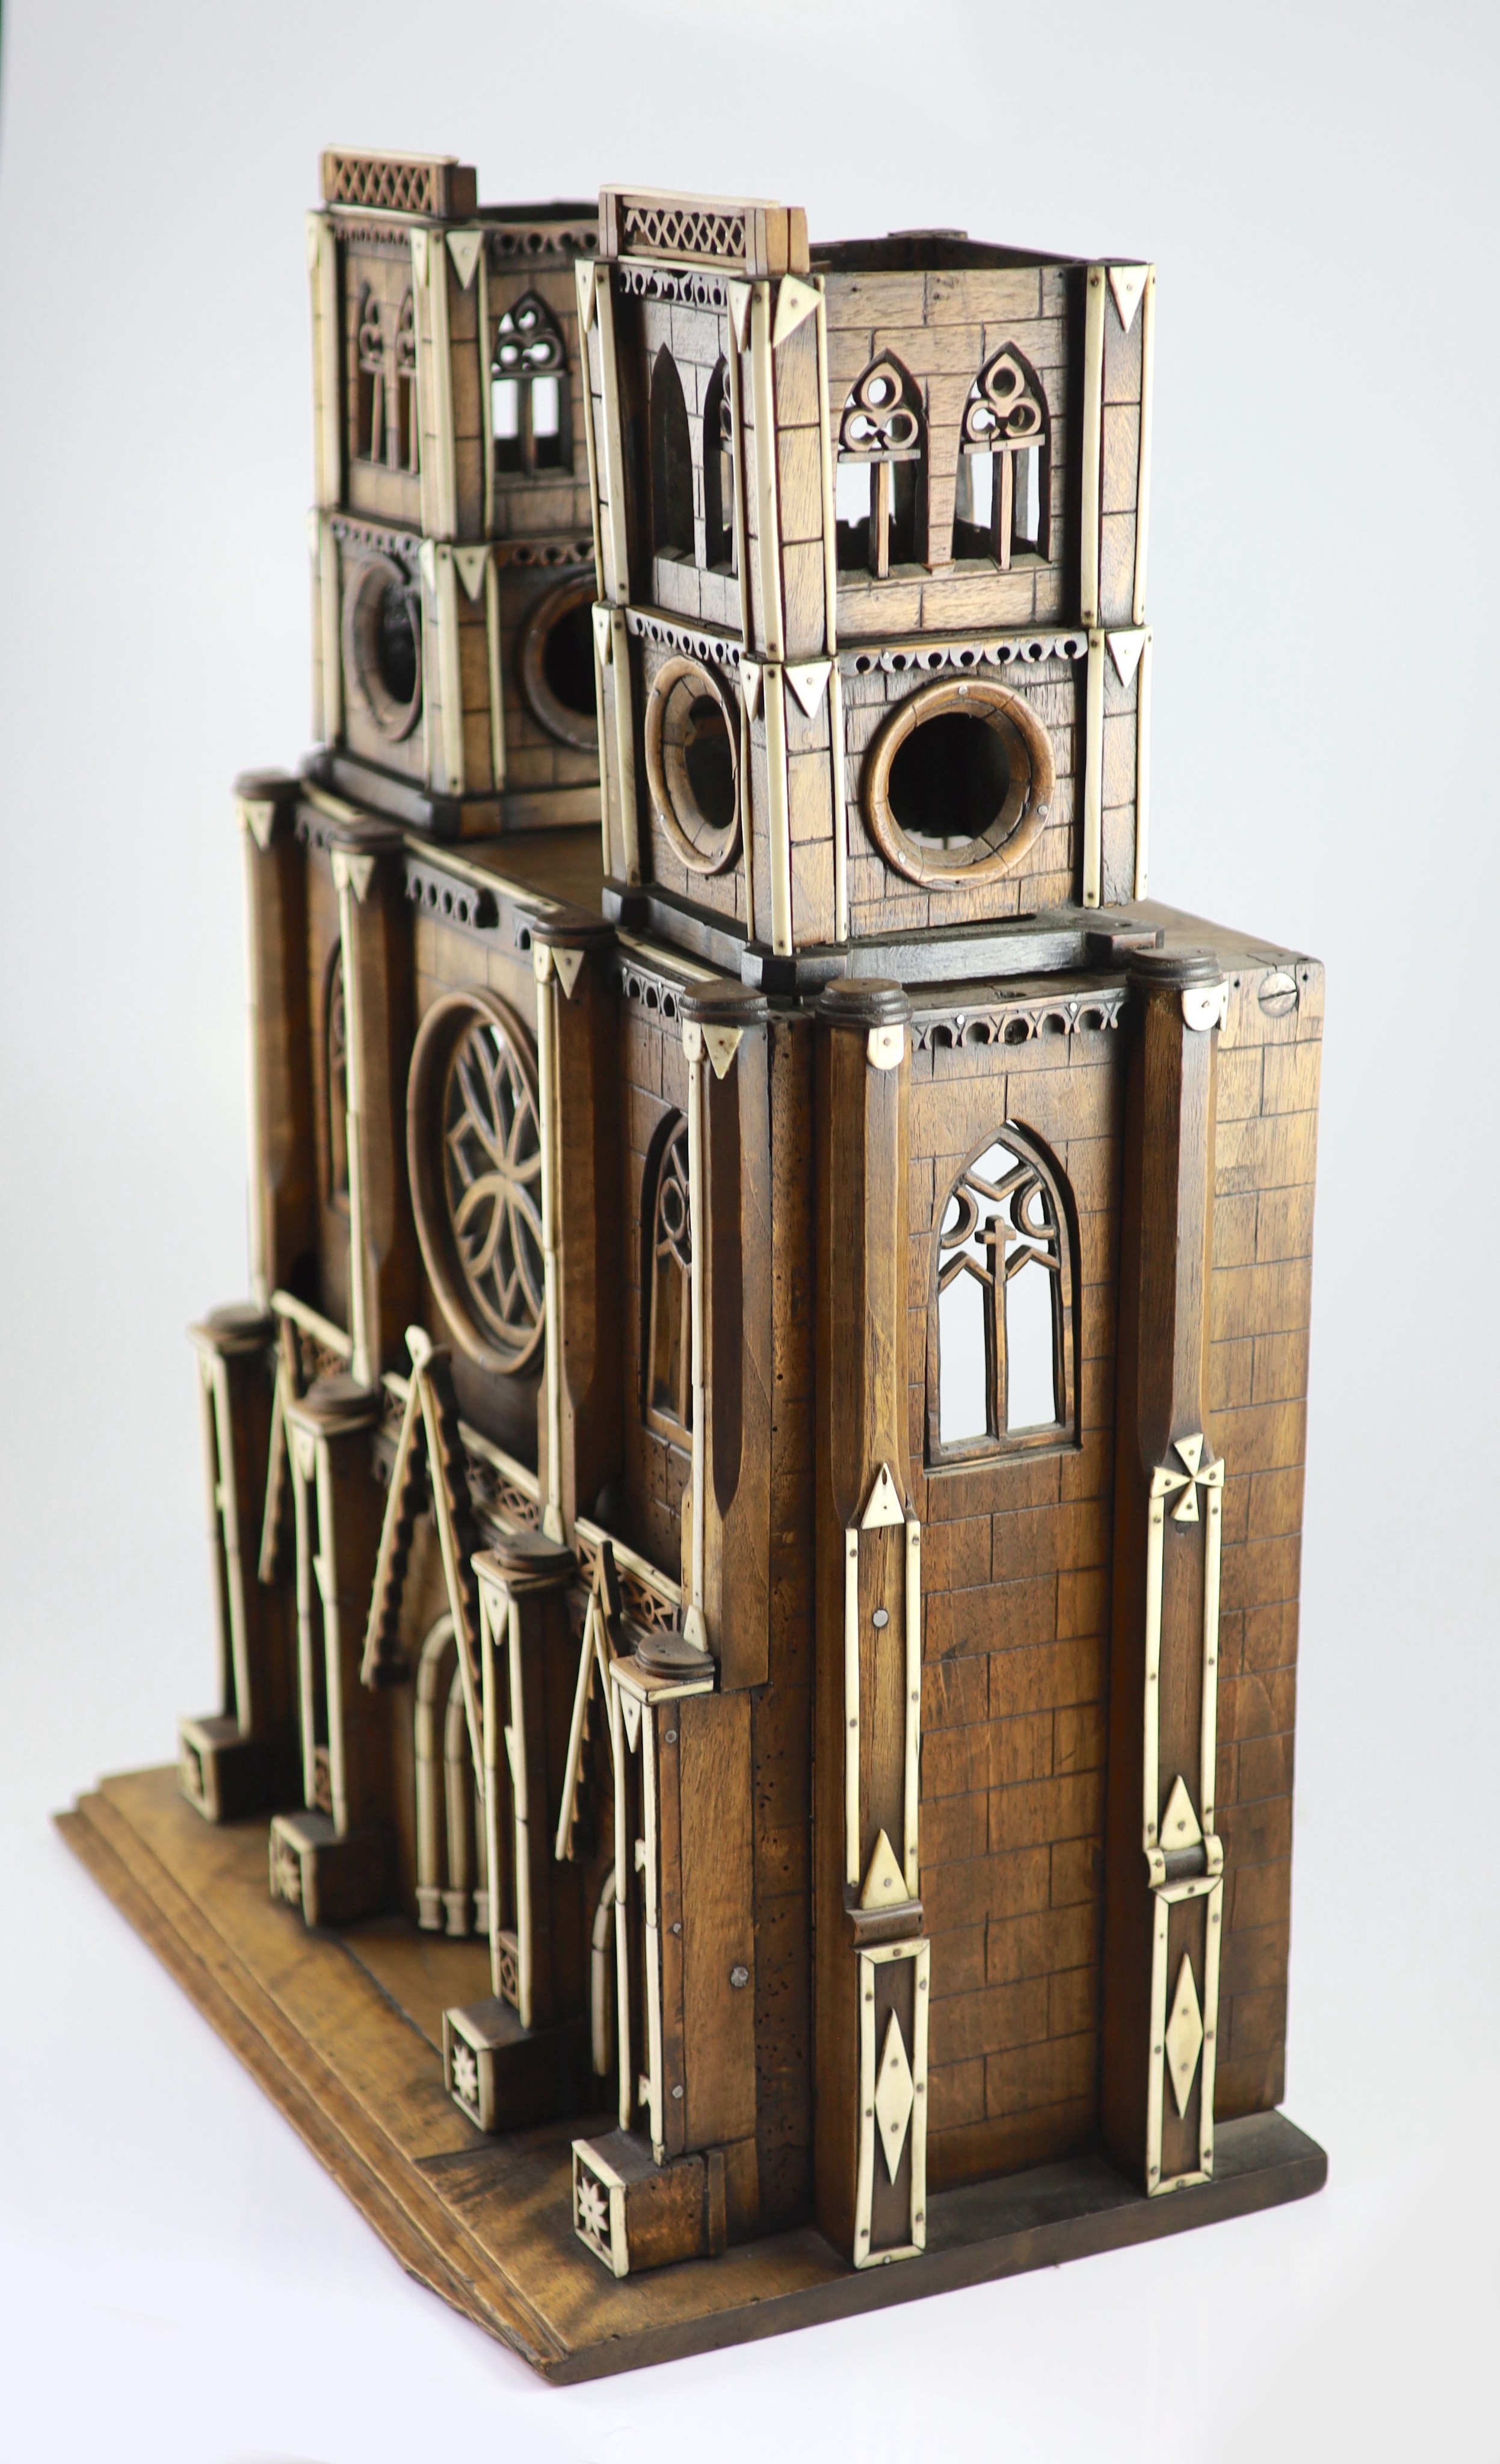 A 19th century French walnut and ivory model, Notre Dame